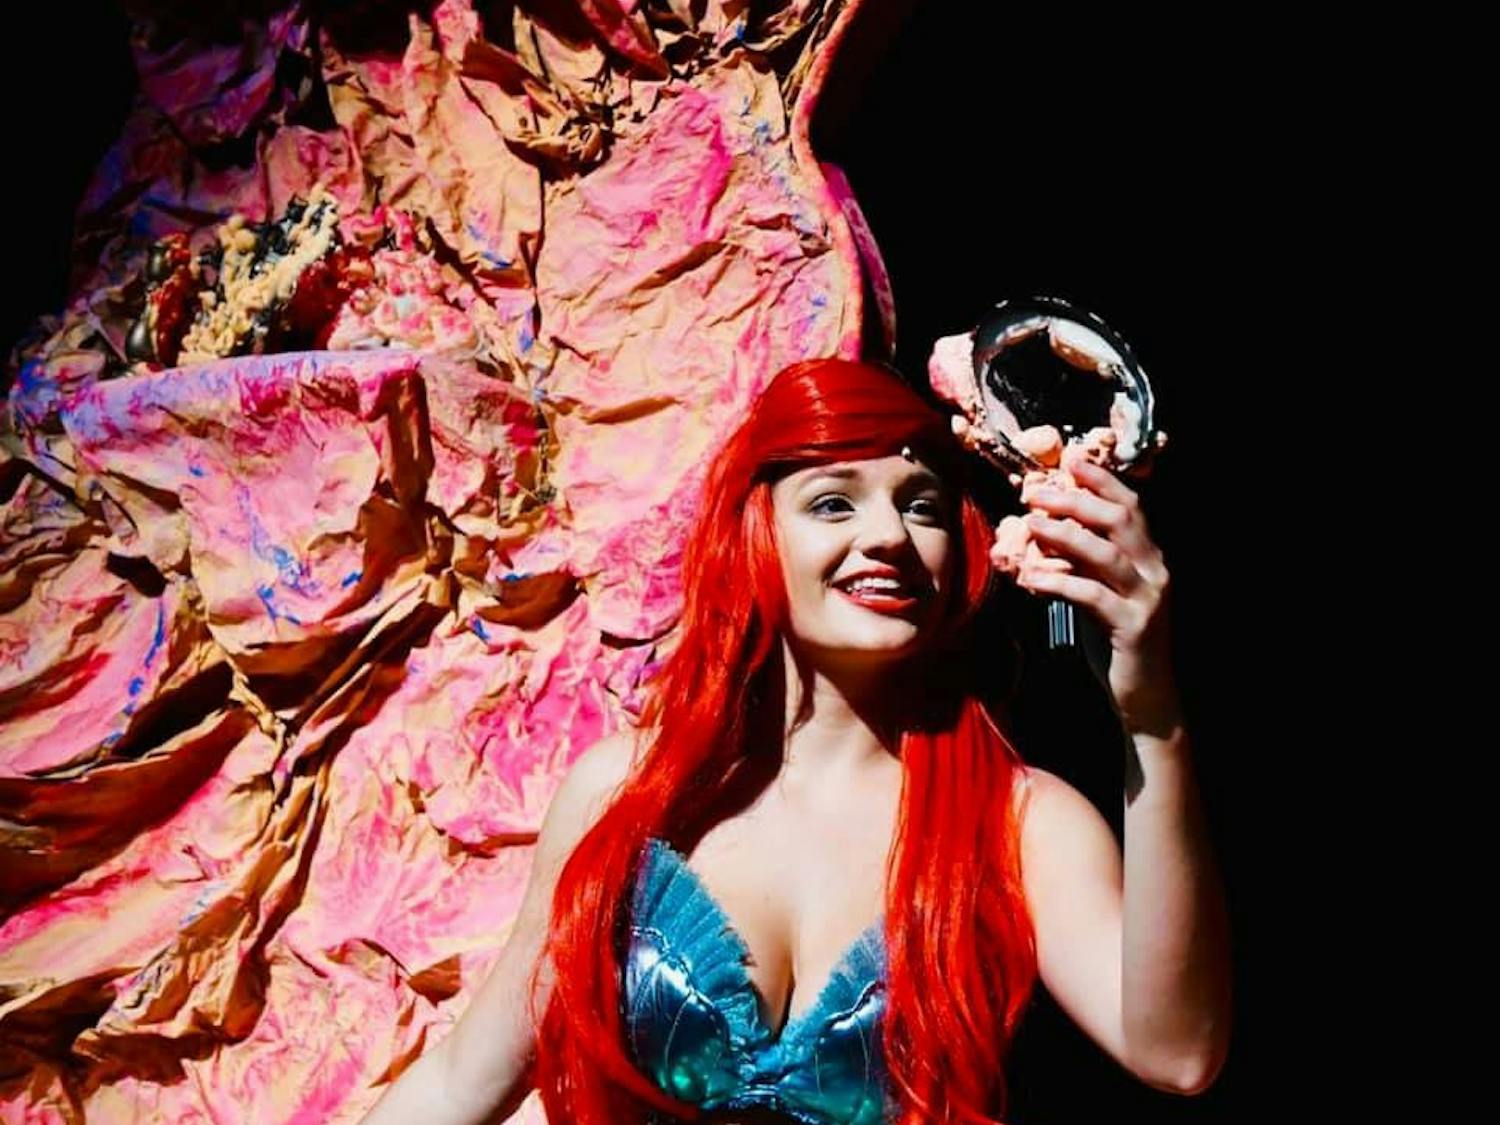 Anna Cappelli, a 21-year-old UF public relations senior, portrayed the role of Ariel.
&nbsp;